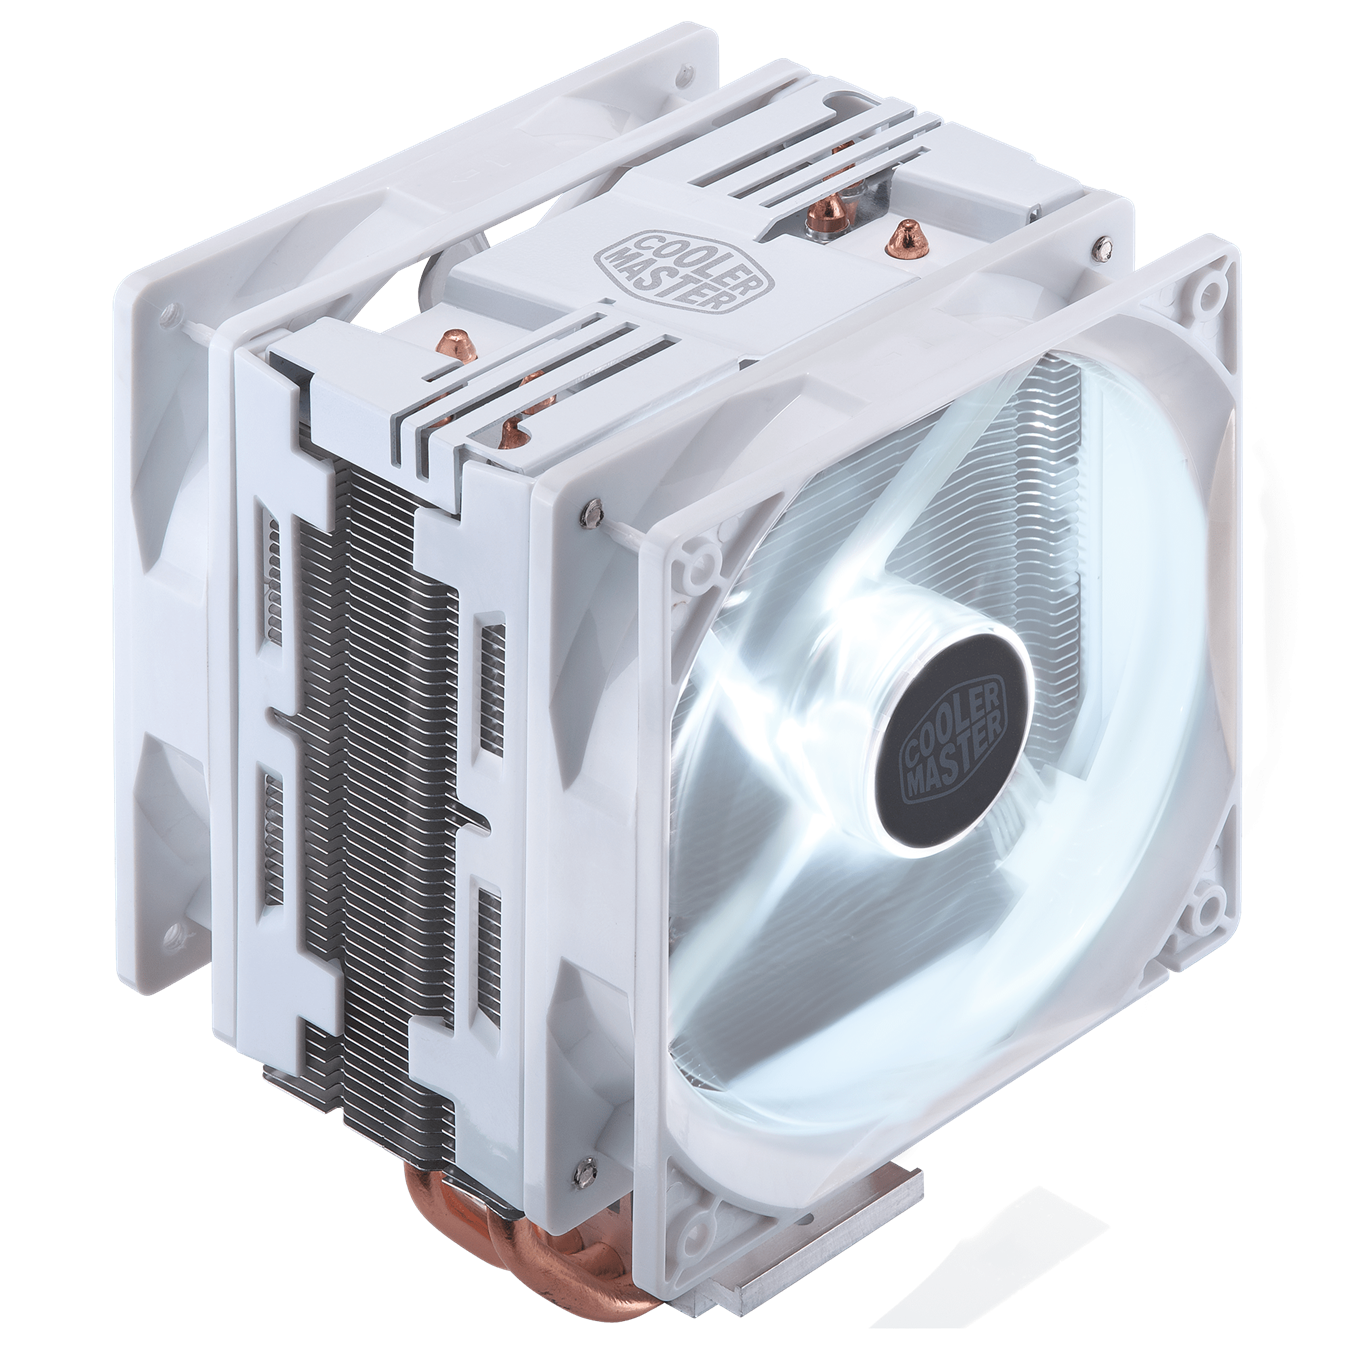 Hyper 212 LED Turbo White Edition CPU Air Cooler